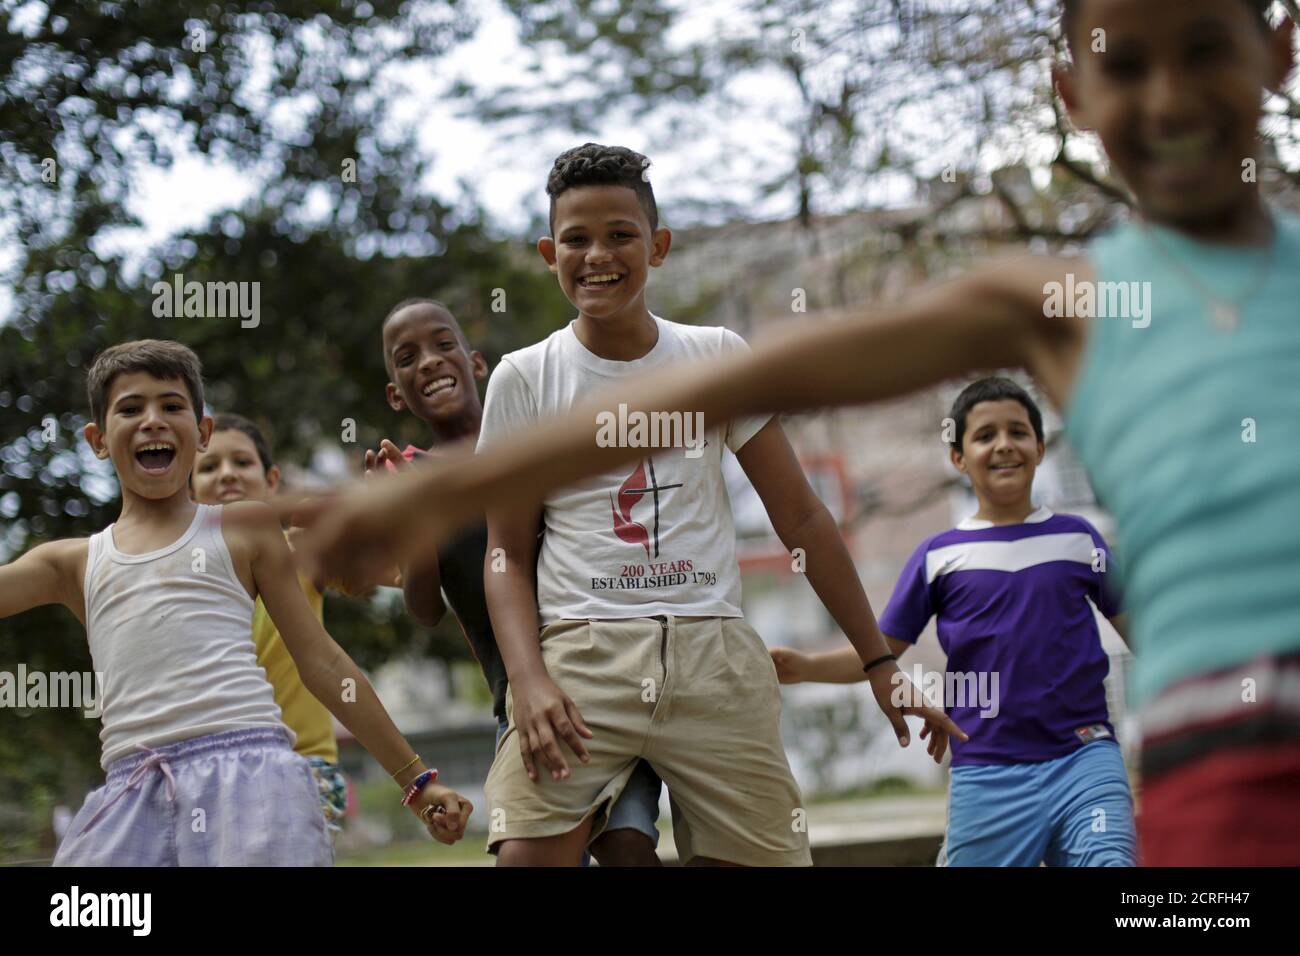 Children react after a soccer match in Alamar, on the outskirts of Havana, Cuba March 19, 2016. REUTERS/Ueslei Marcelino Stock Photo